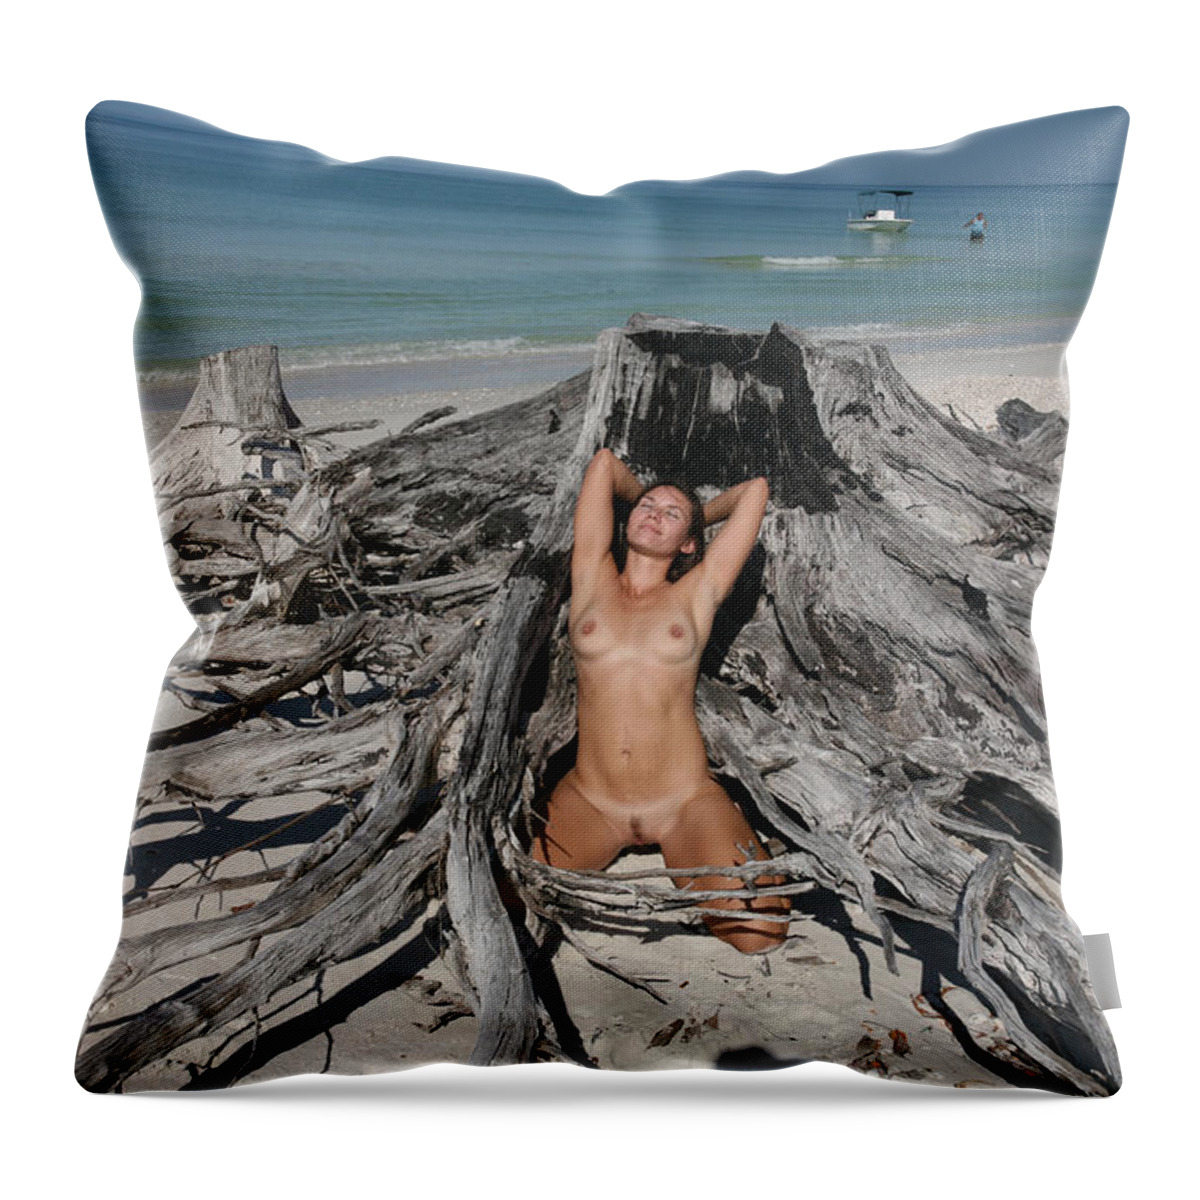 Everglades City Glamour Photographer Lucky Cole Sexy Exotic Female Beauty Natural Settings Glamorous Throw Pillow featuring the photograph Everglades City Beauty 699 by Lucky Cole